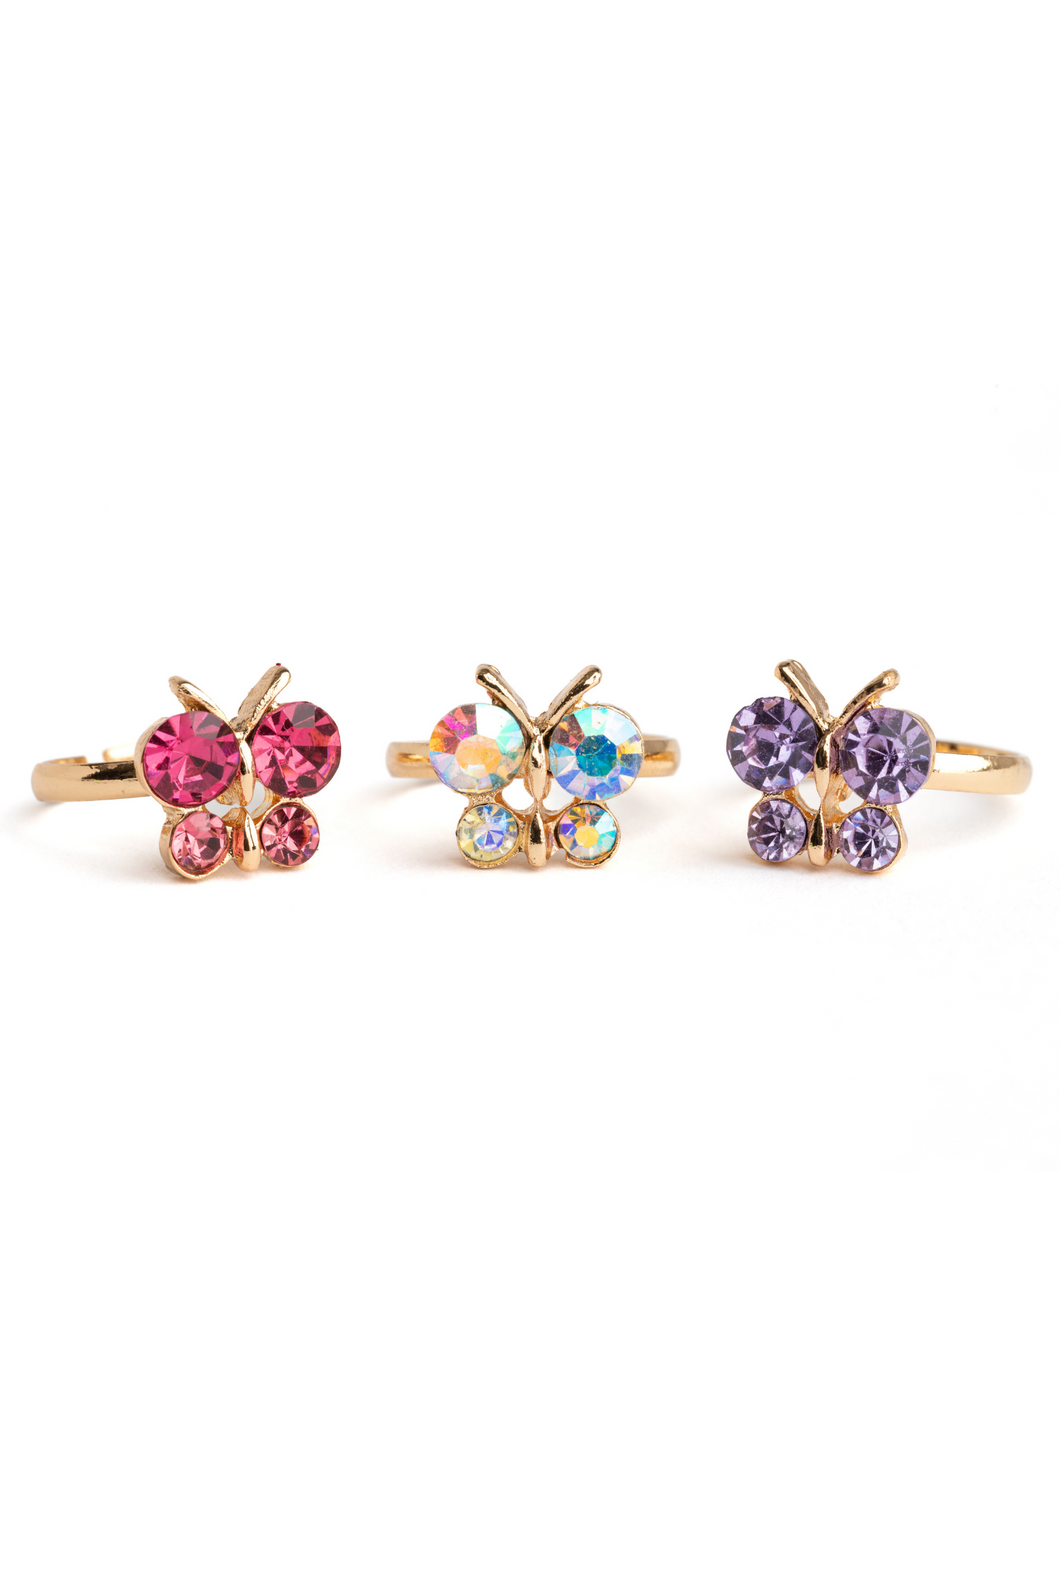 Boutique Butterfly Gem Ring Set